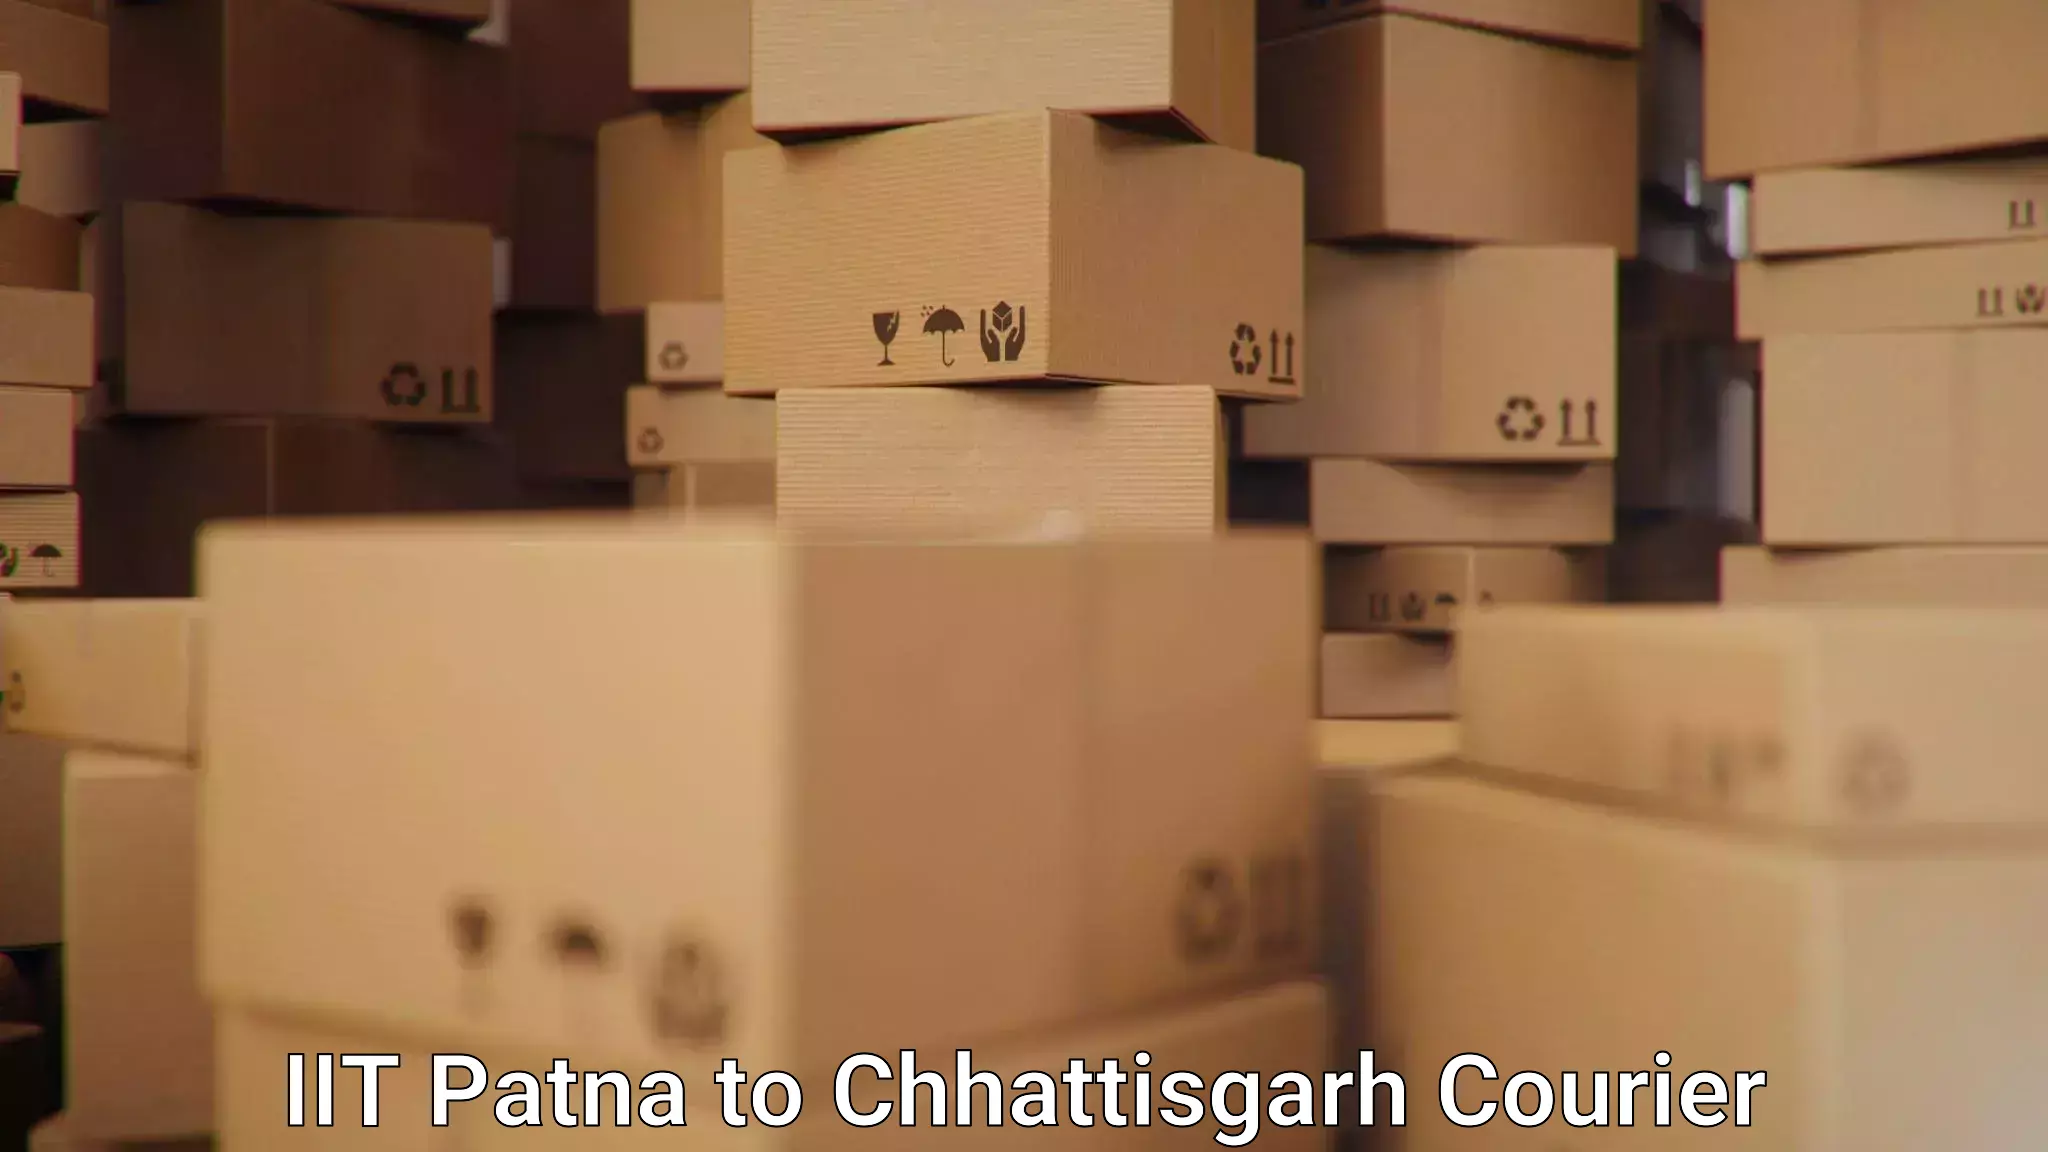 Premium courier services in IIT Patna to Rajnandgaon